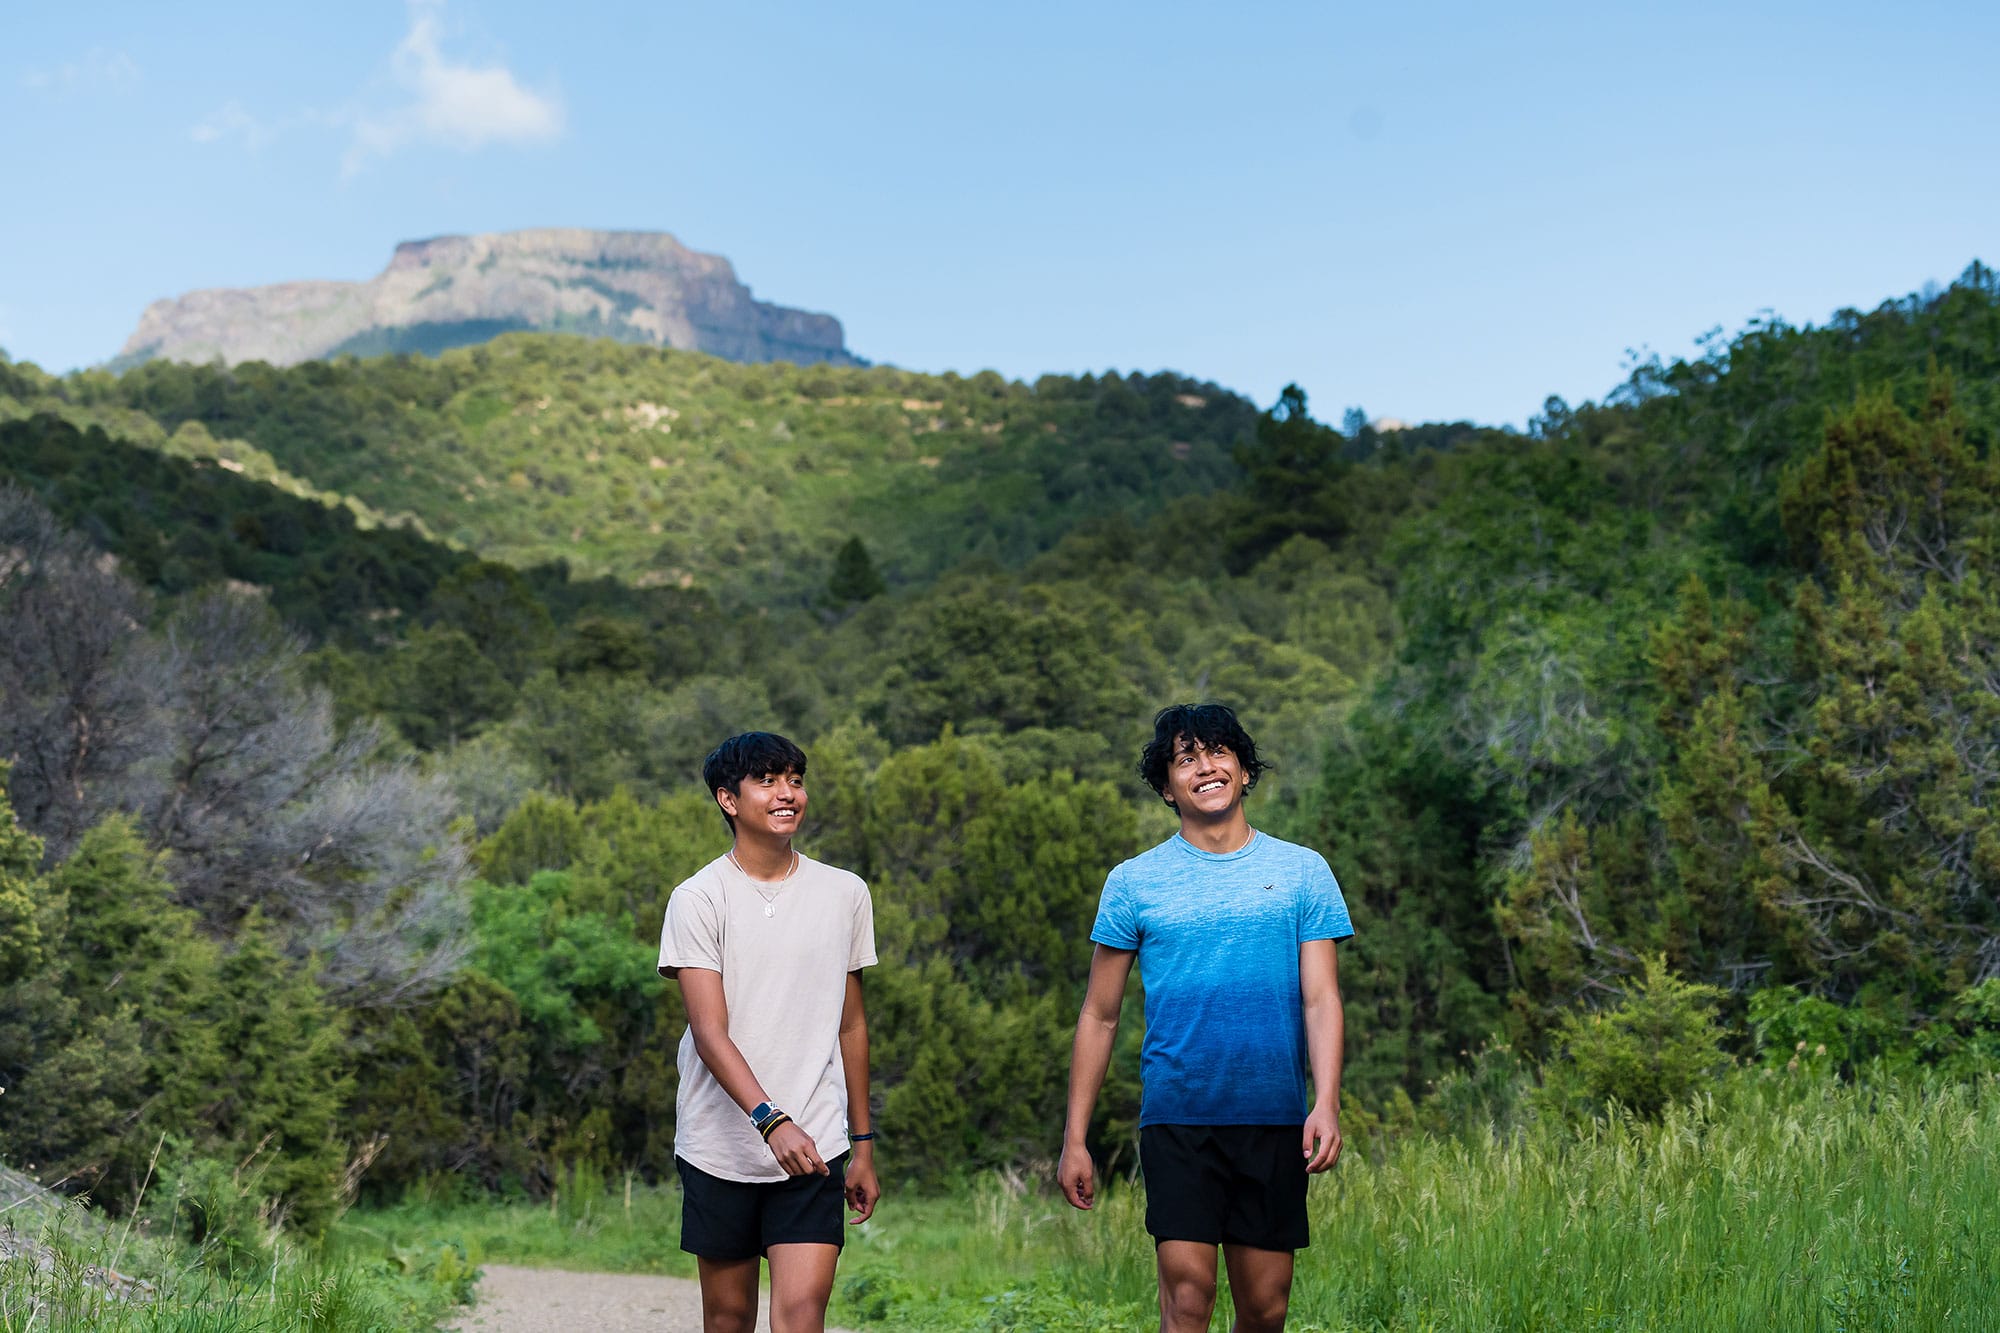 Two young men walking on a trail with mountains in the background.